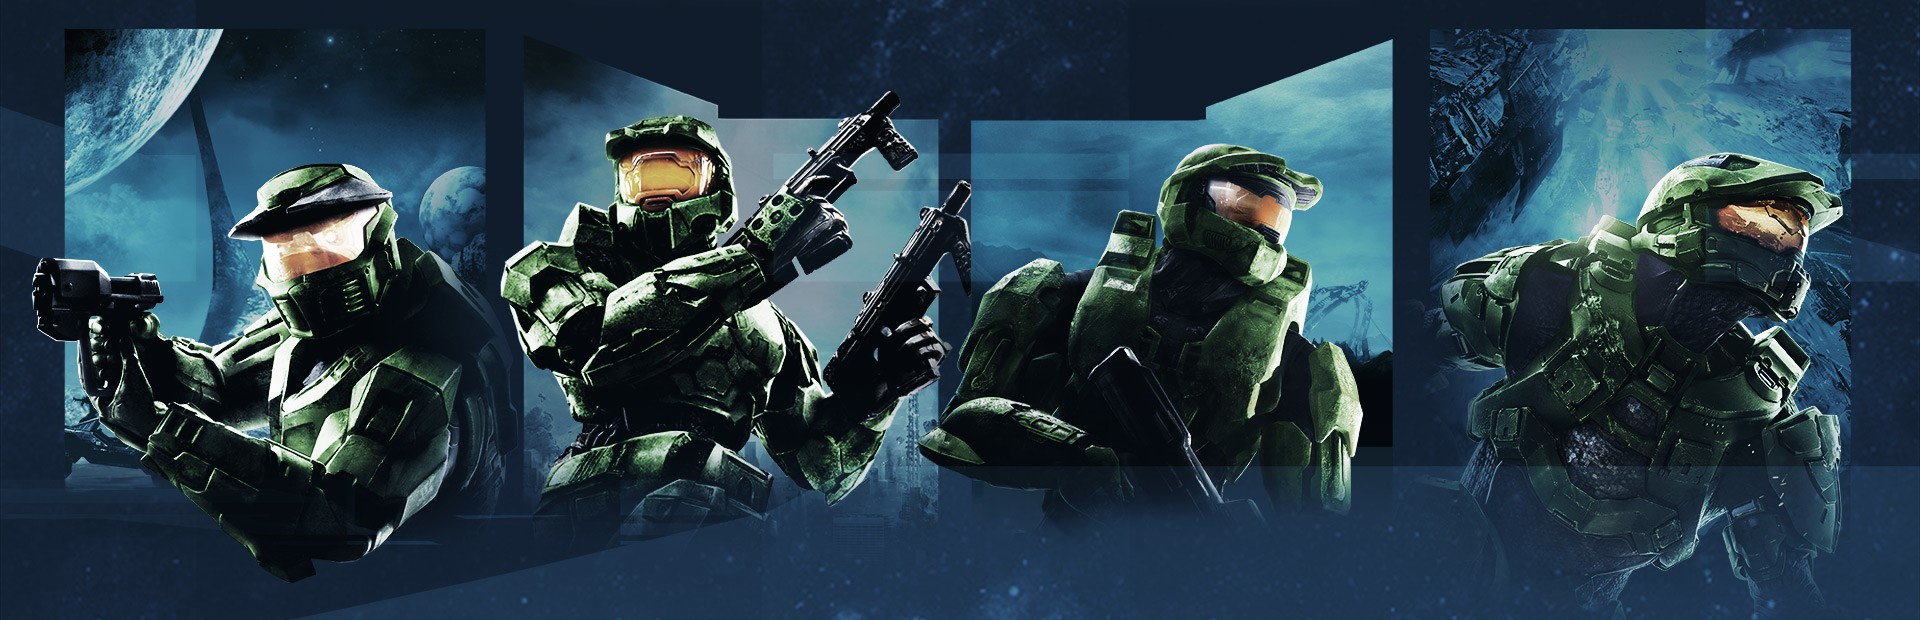 Master chief collection русификатор. Halo Master Chief. Halo: the Master Chief collection. Halo Master Chief collection обложка. Halo Master Chief collection системные требования.